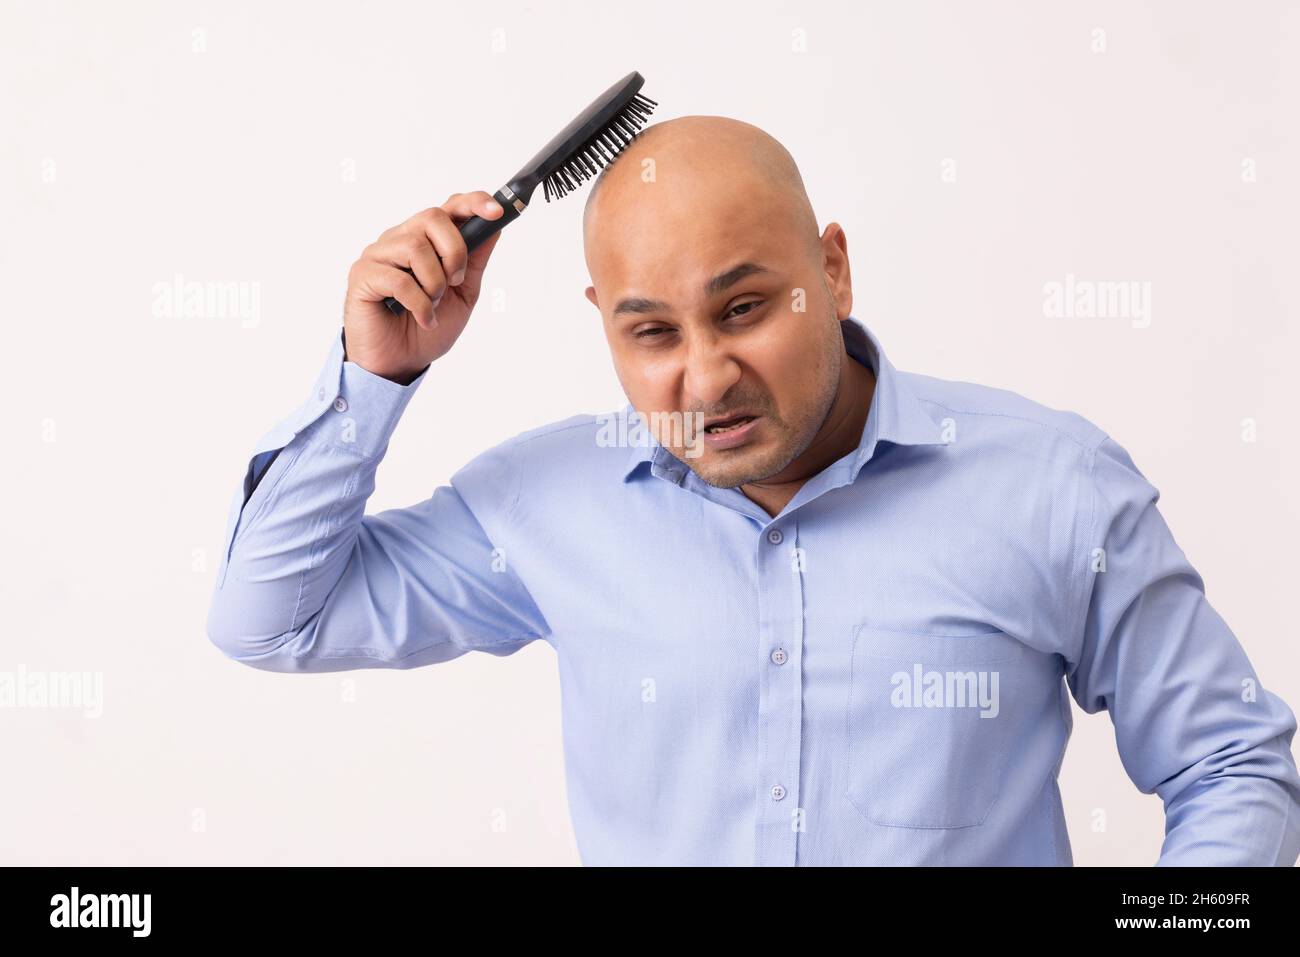 Portrait of a bald man combing his shaved head with frustration against white background. Stock Photo